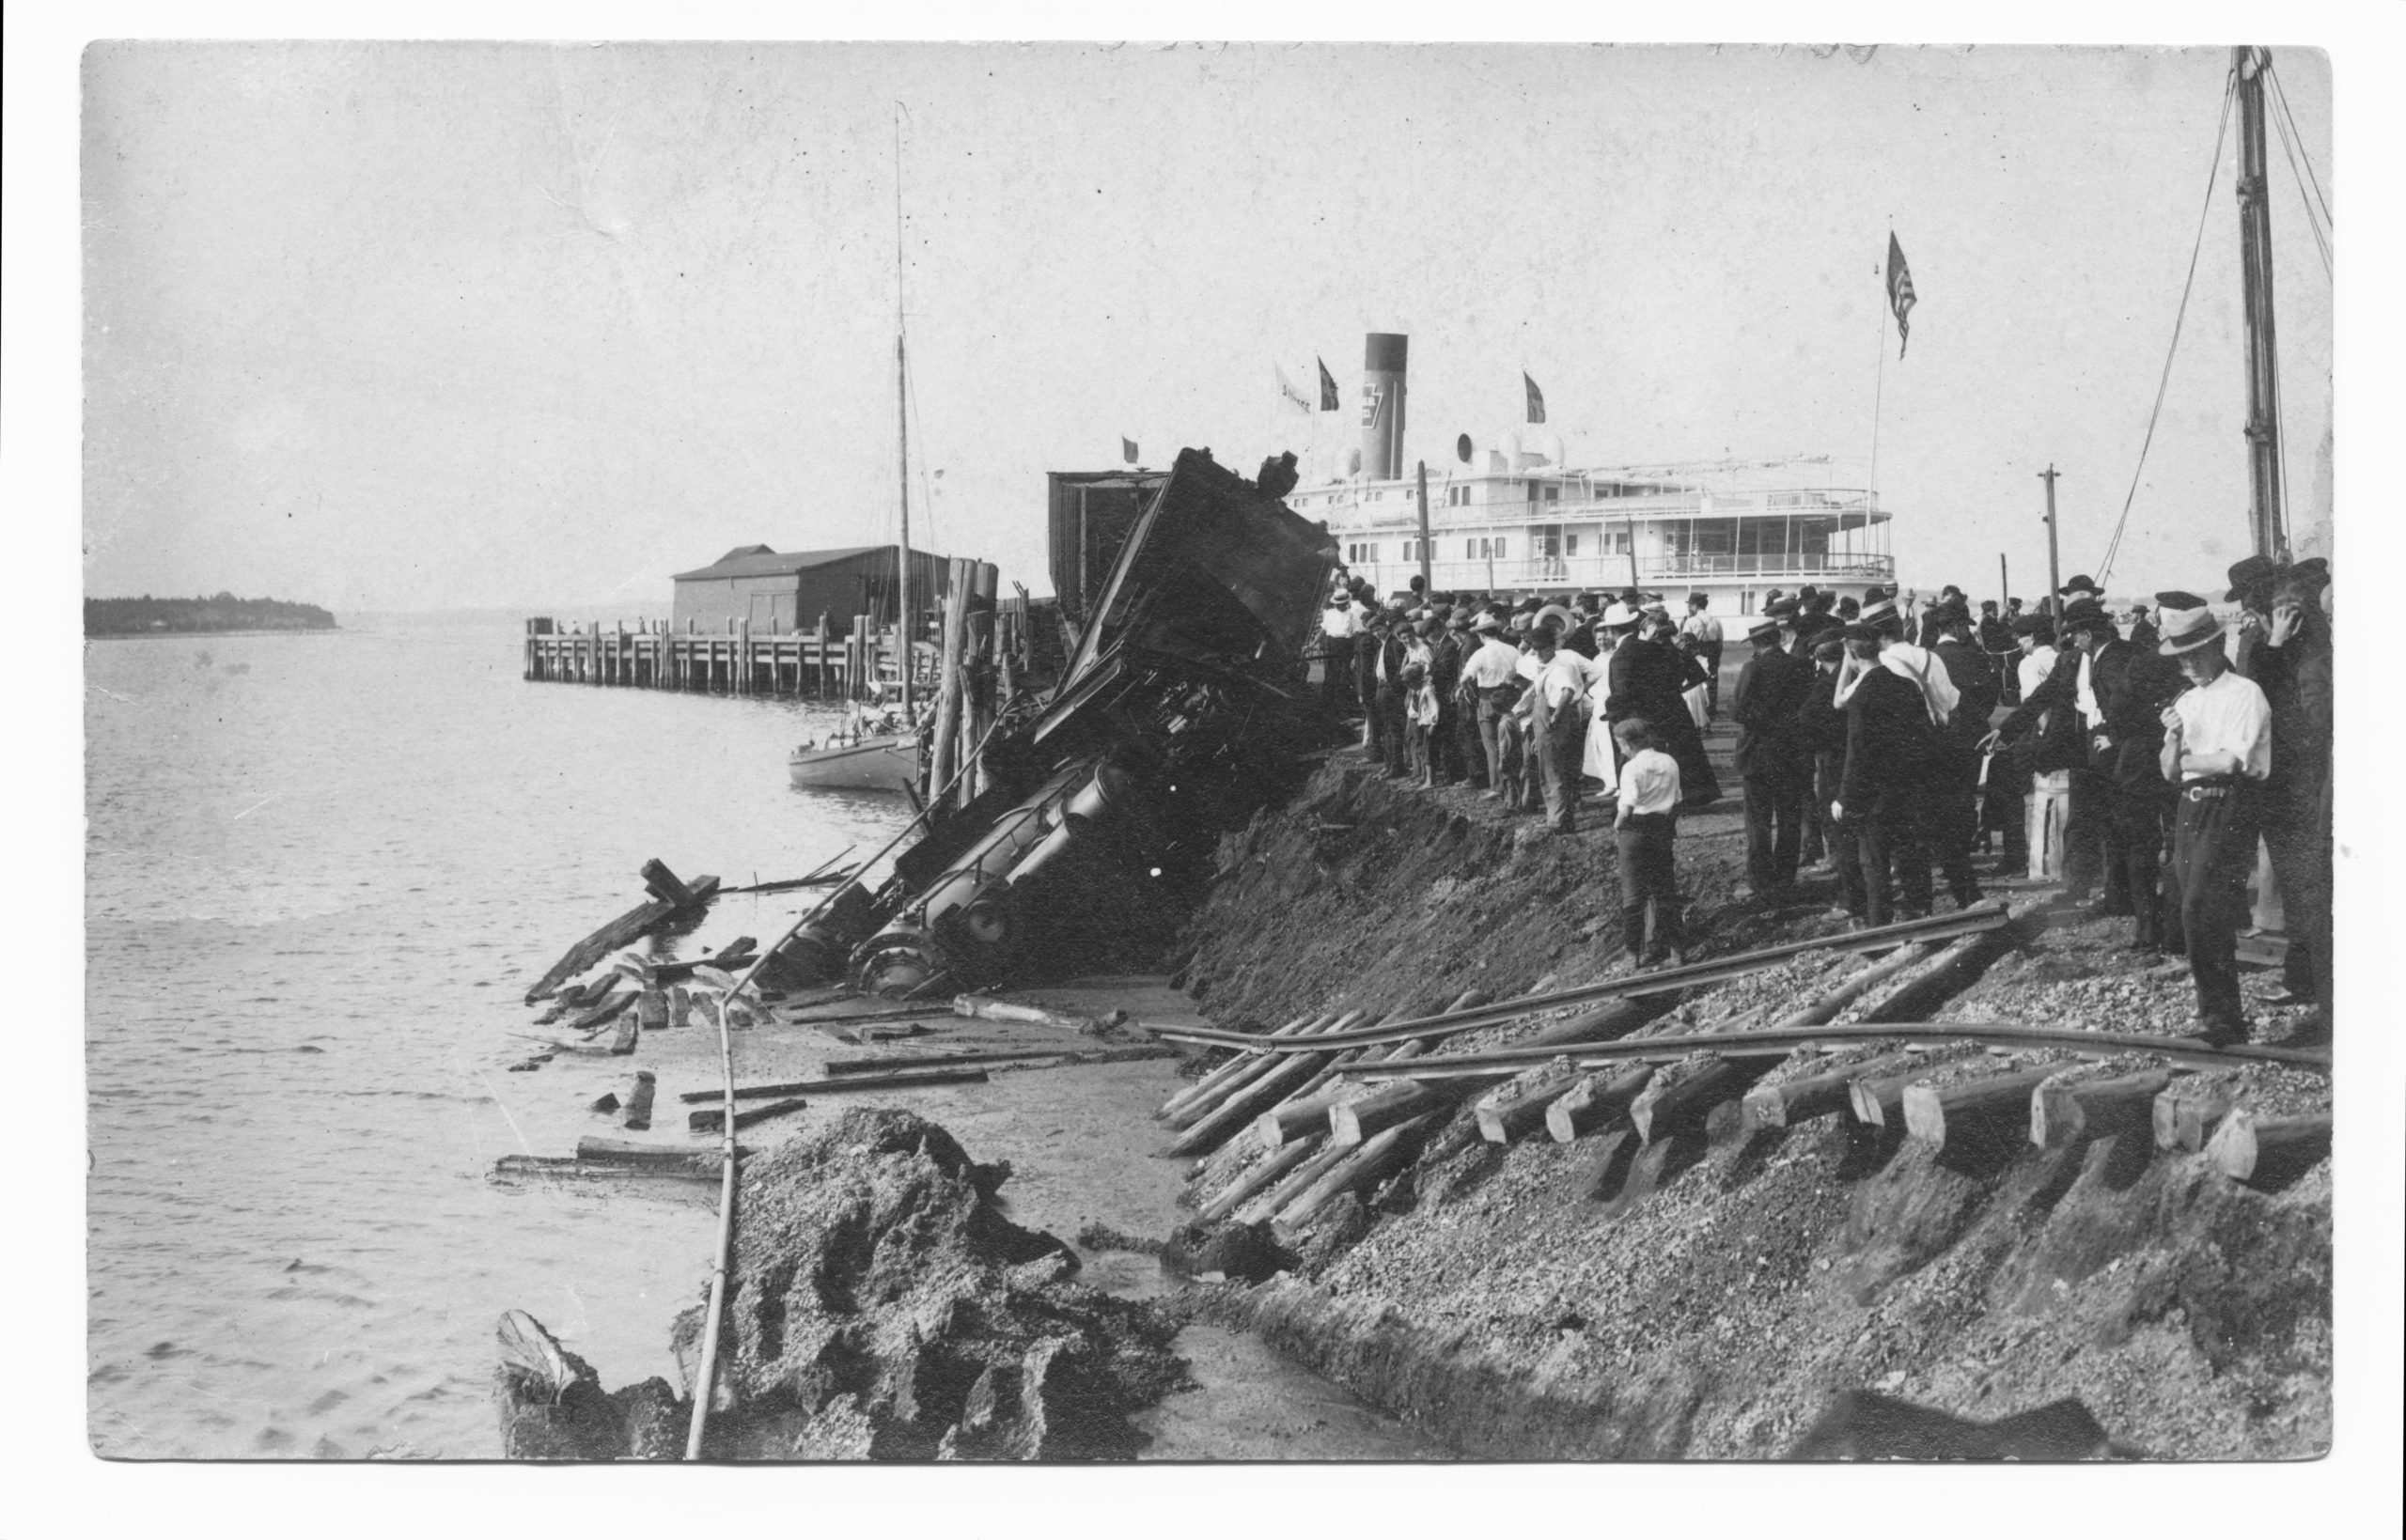 This Long Island Rail Road locomotive ended up in the harbor when a portion of Long Wharf collapsed in 1908. Gift of Steve Peters to Sag Harbor Historical Society.